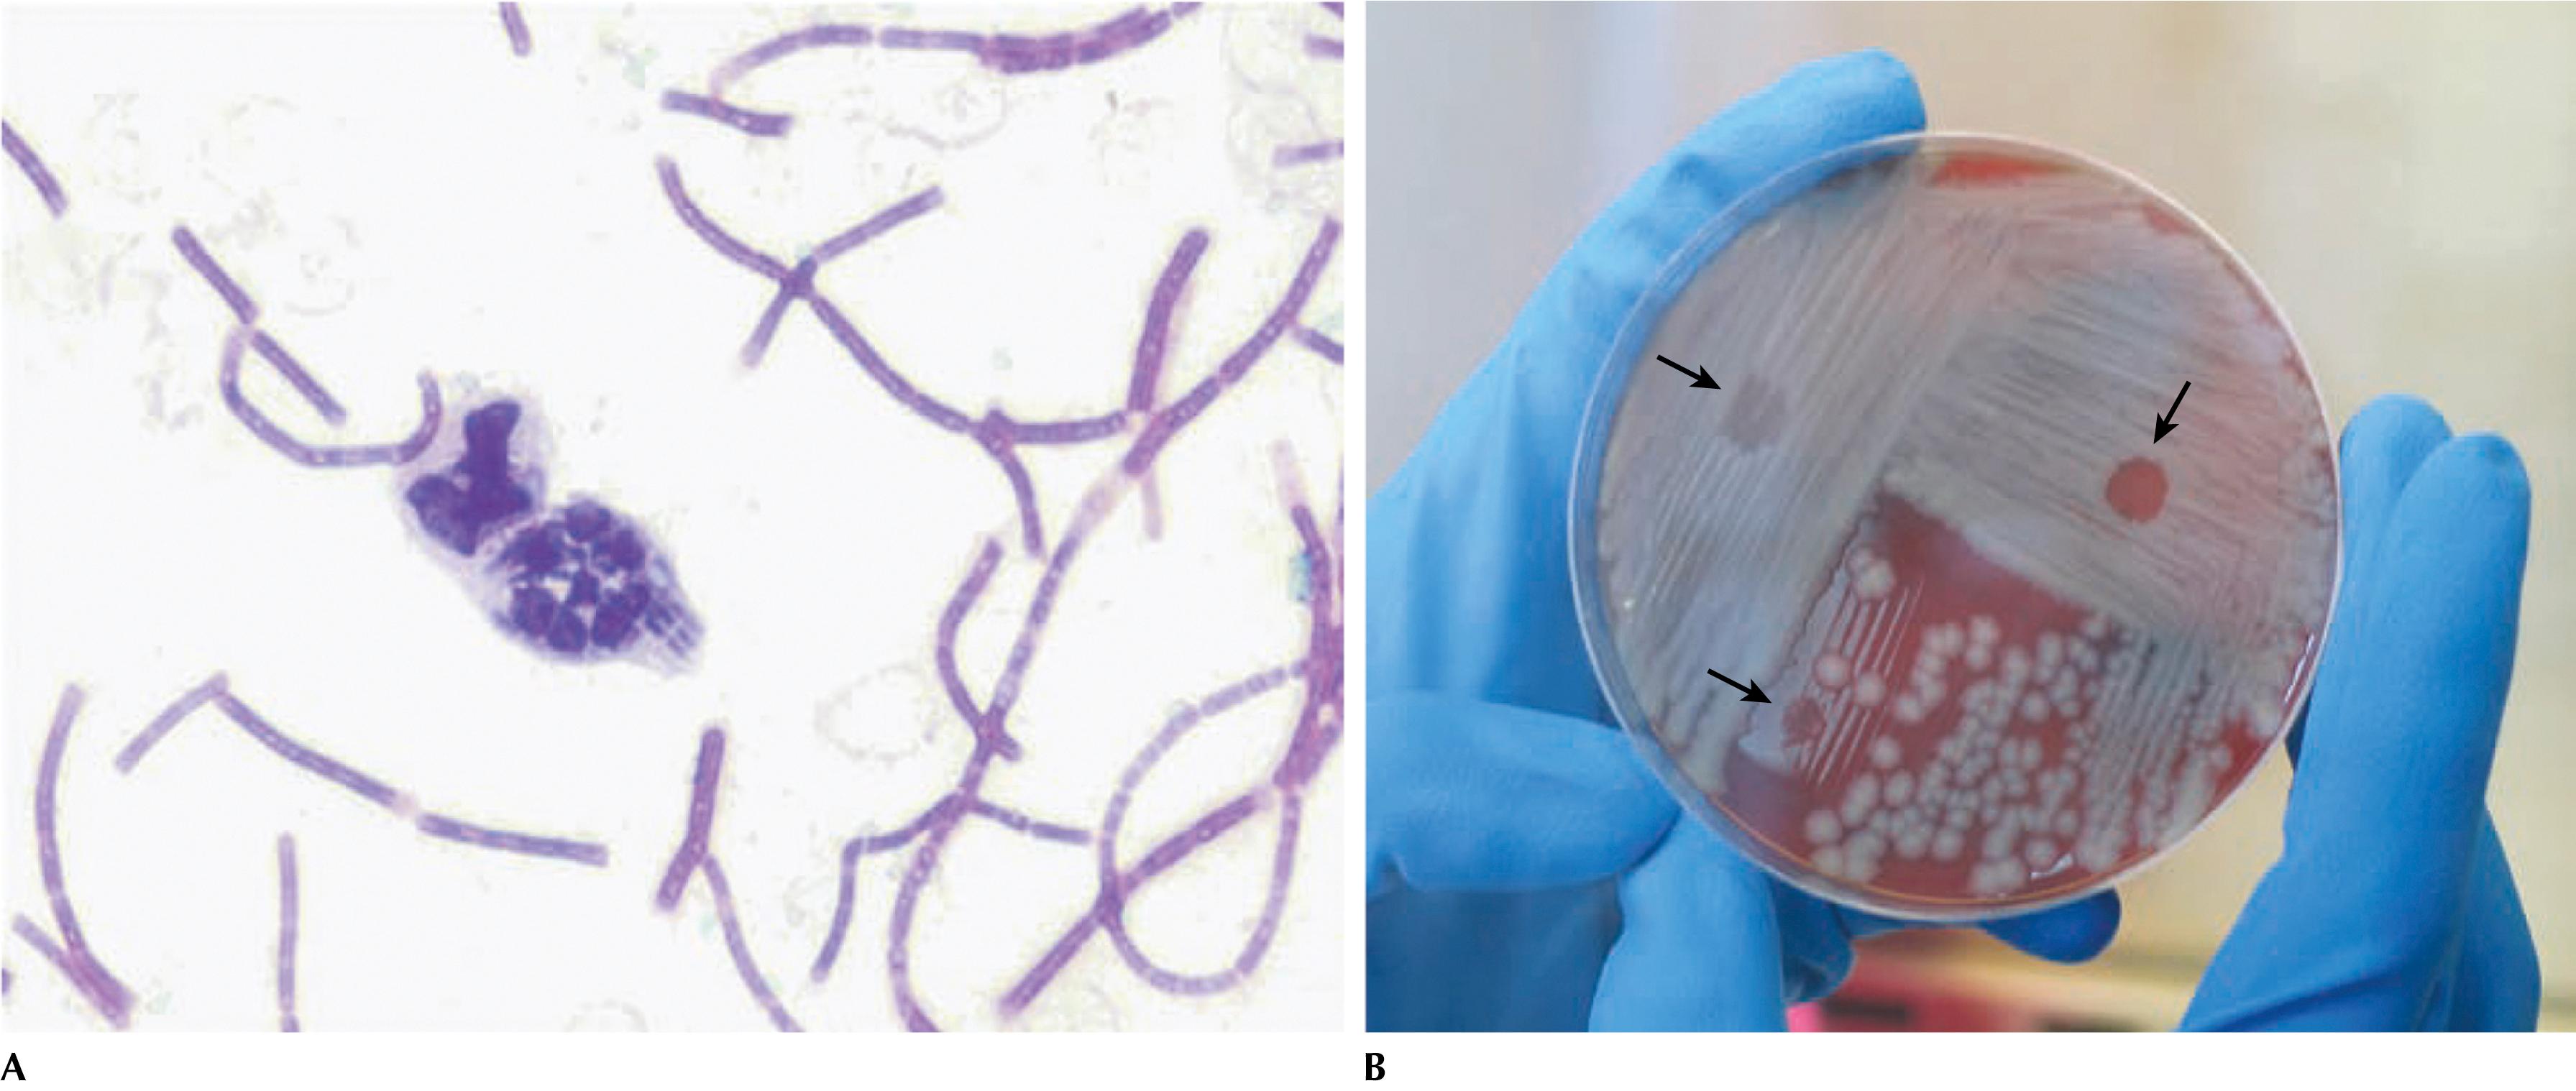 Fig. 90.1, In vitro and clinical images of Bacillus anthracis . (A) Gram stain of infected guinea pig blood smear demonstrating intracellular bacilli chains next to a polymorphonuclear leukocyte. (Courtesy of Susan Welkos, PhD, Division of Bacteriology, US Army Medical Research Institute of Infectious Diseases, Fort Detrick, Maryland.) (B) Isolated colonies of Bacillus anthracis on sheep blood agar plate. The plate has been treated with an organism-specific gamma-phage causing cell lysis (arrows) .